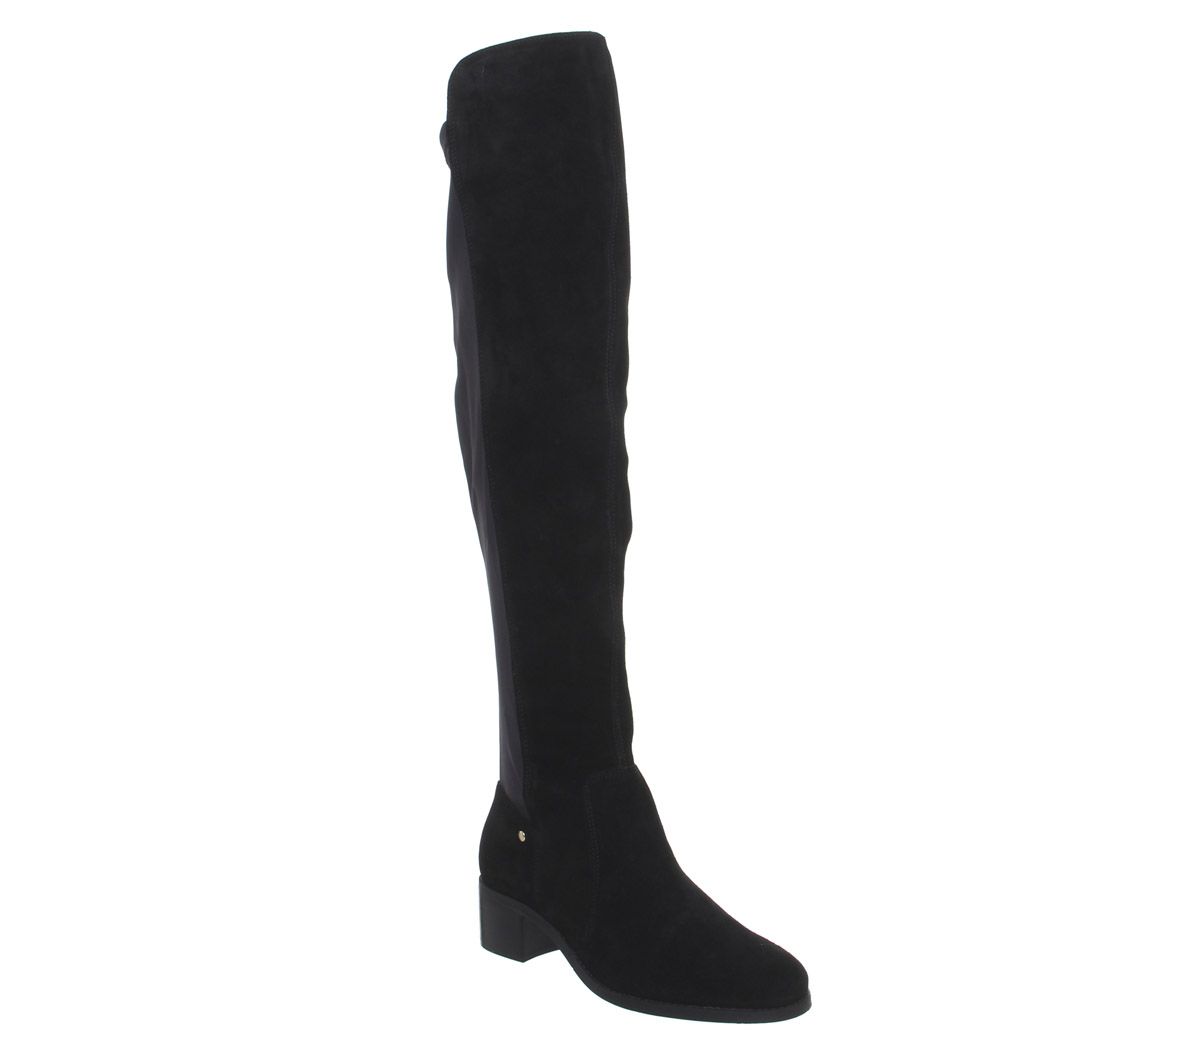 Office Kite Stretch Back Over The Knee Boots Black Suede Knee High Boots